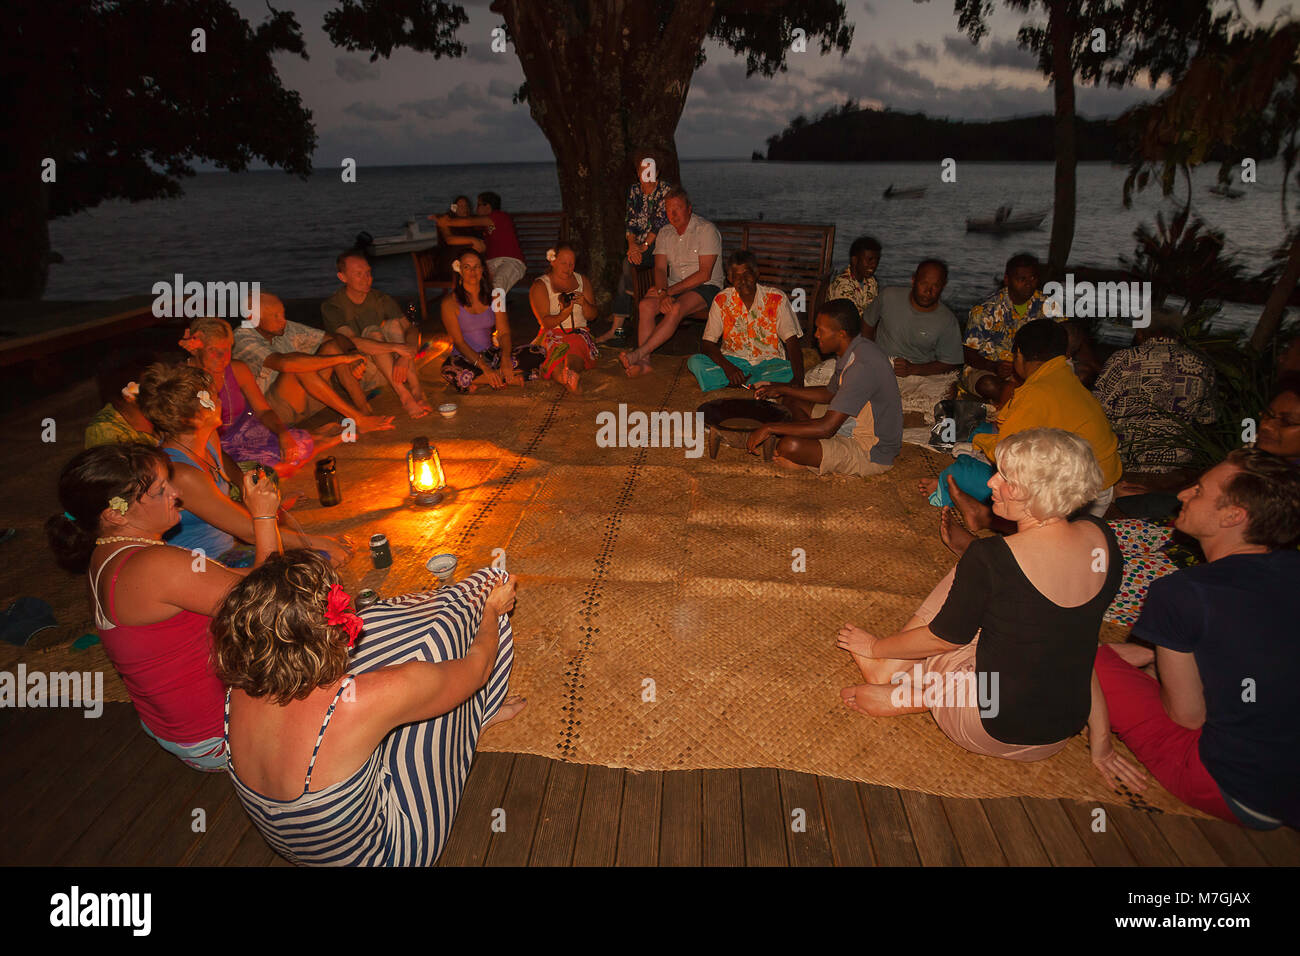 A group of guests seated in a circle on woven mats at the Matava Resort on the island of Kadavu, enjoying Kava, Fiji. Stock Photo